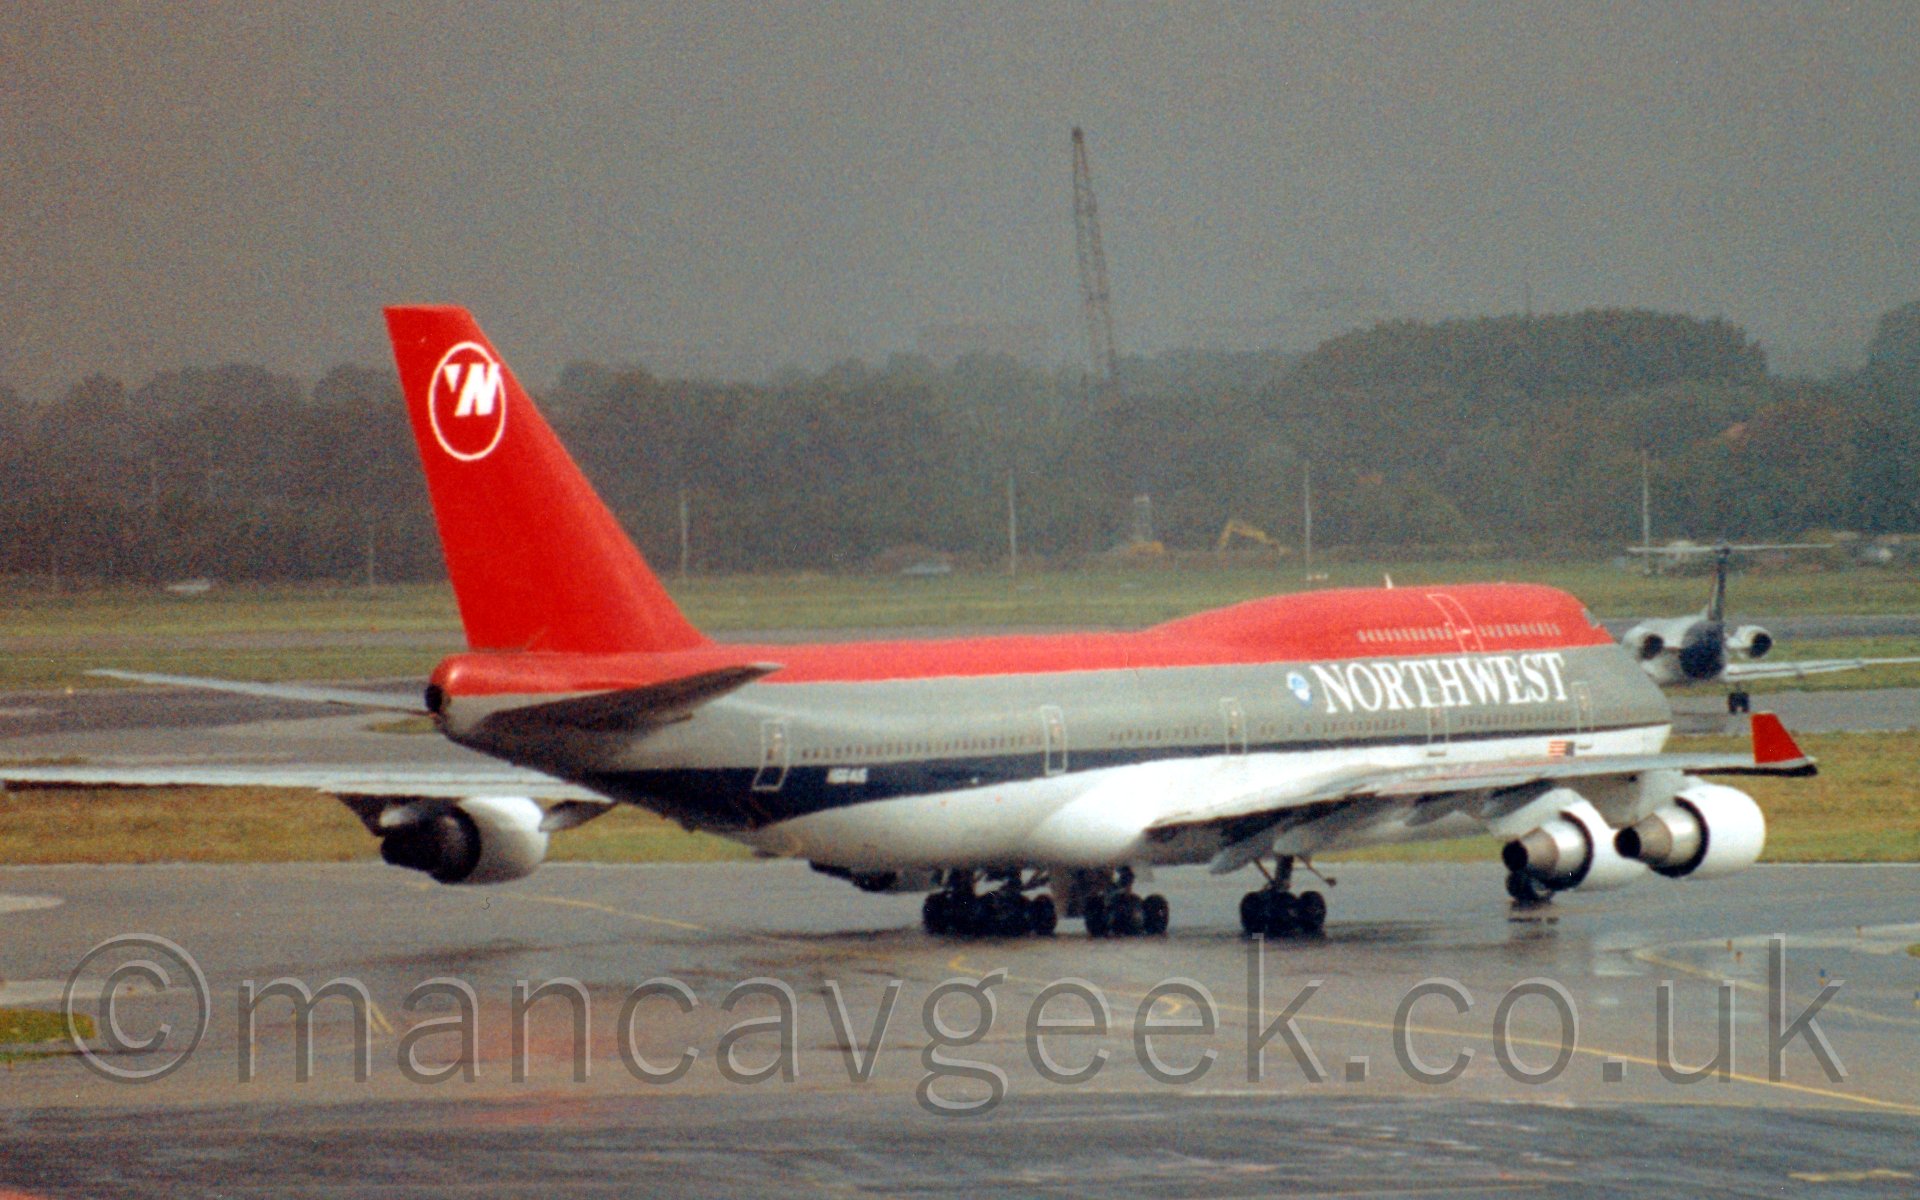 Side view of a very large 4 engined jet airliner taxiing from left to right and slightly away from the camera at a rather misty airport. The plane has a red top and light grey belly, with a thick dark grey stripe and thin black stripe running along the body, the black stripe getting wider towards the rear. There are white "Northwest" titles on the grey stripe on the upper forward fuselage, under the passenger cabin windows on the upper deck. The red tail has the white outkine of a circle at the top, with a large letter "N" in the top right, and a small white triangle pointing North-West in the top left. The upturned wingtips are also painted red, while the engine pods are painted white. In the background, a smaller, twin engined jet airliner is taxiing away from the camera on the right of the frame, with grass leading off to trees and a dismal grey sky filling the rest of the frame.